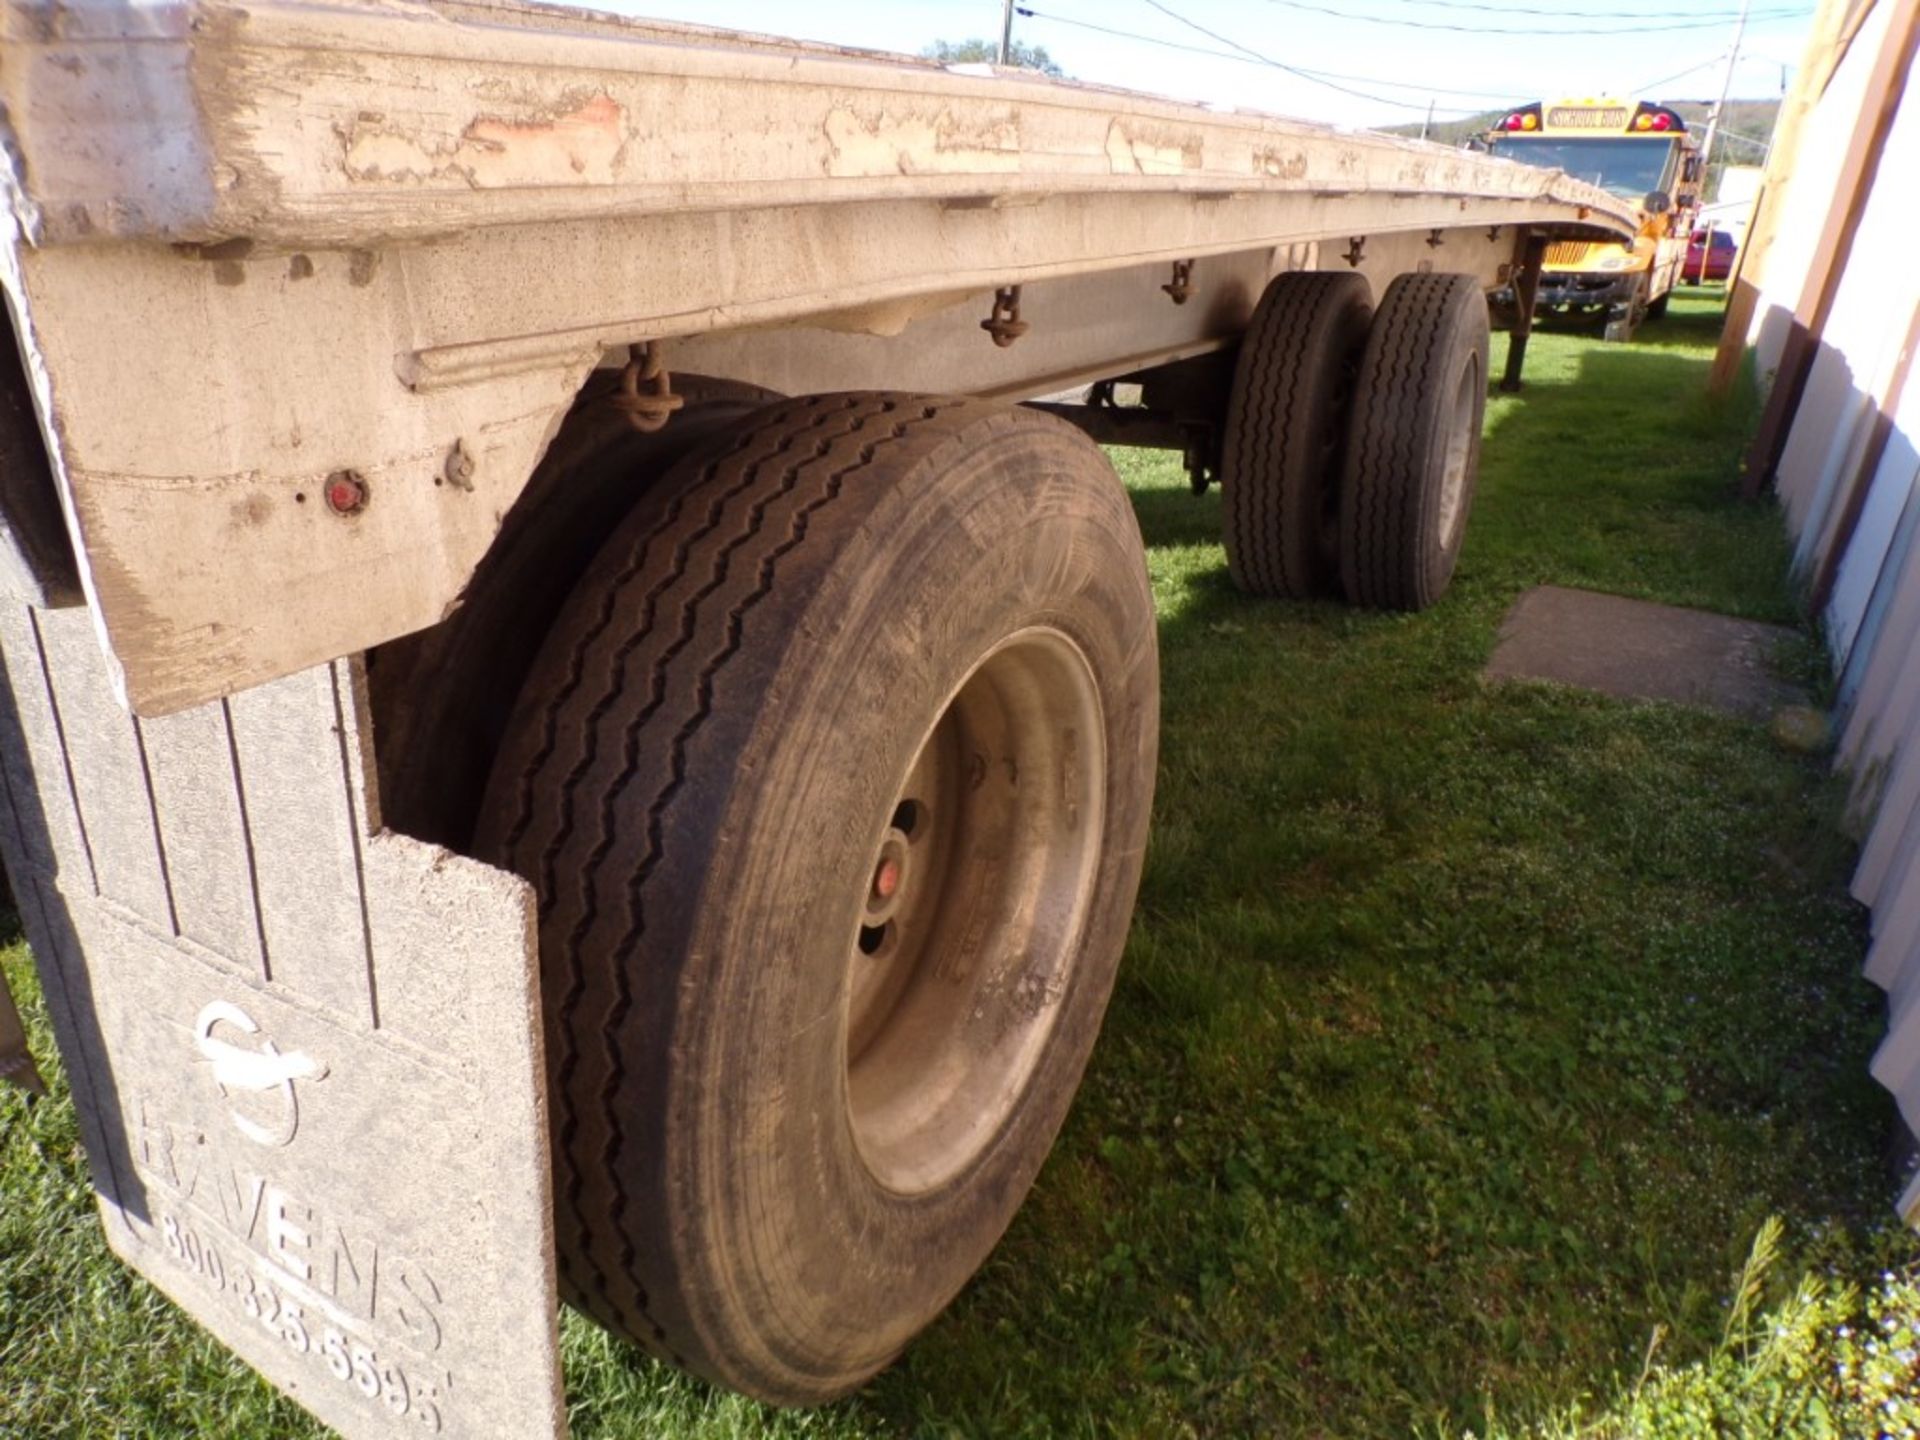 2000 48' Ravens Alum. Trailer, Spread Axle, New Drums, Brakes, New Tires, Vin# 1R1F24827YK500107 - - Image 5 of 7